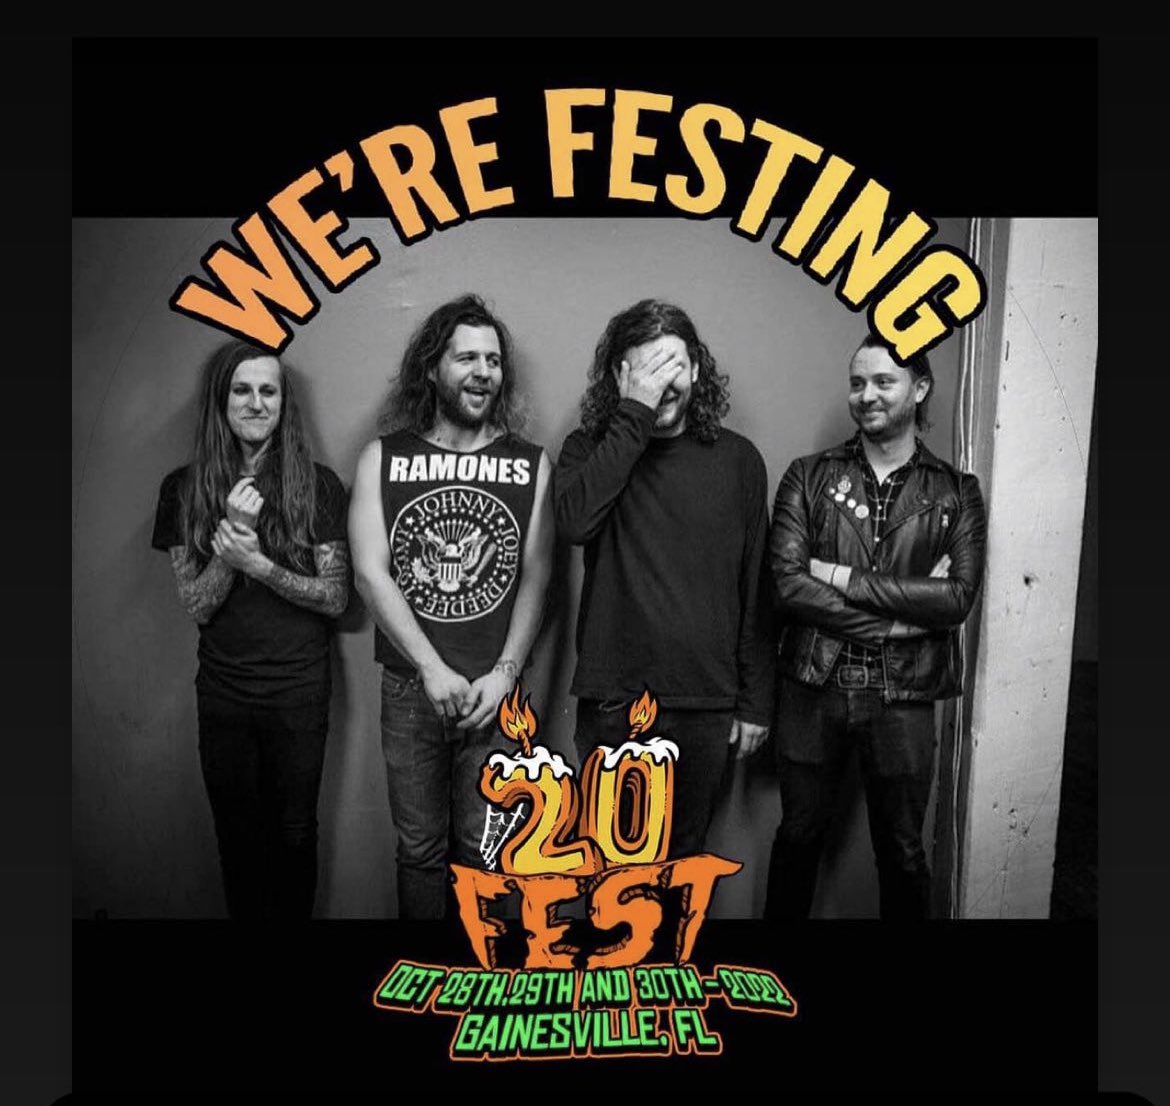 Our first gig in 2 1/2 years goes down TODAY! @thefestfl 4:20pm at Heartwood !